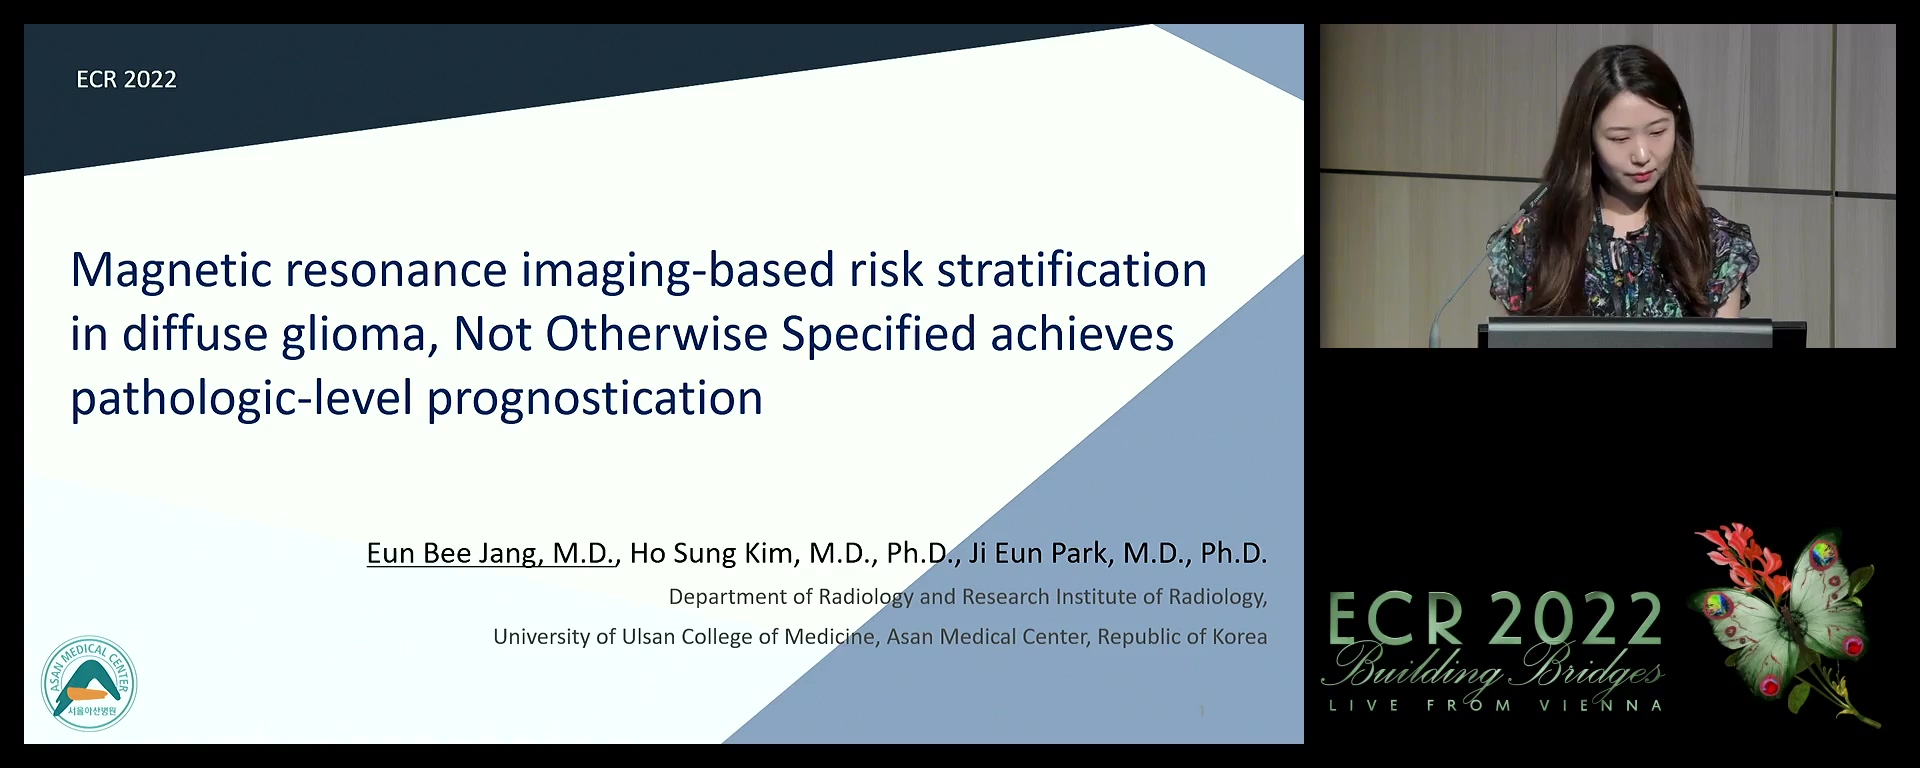 Magnetic resonance imaging-based risk stratification in diffuse glioma, not otherwise specified, achieves pathologic-level prognostication